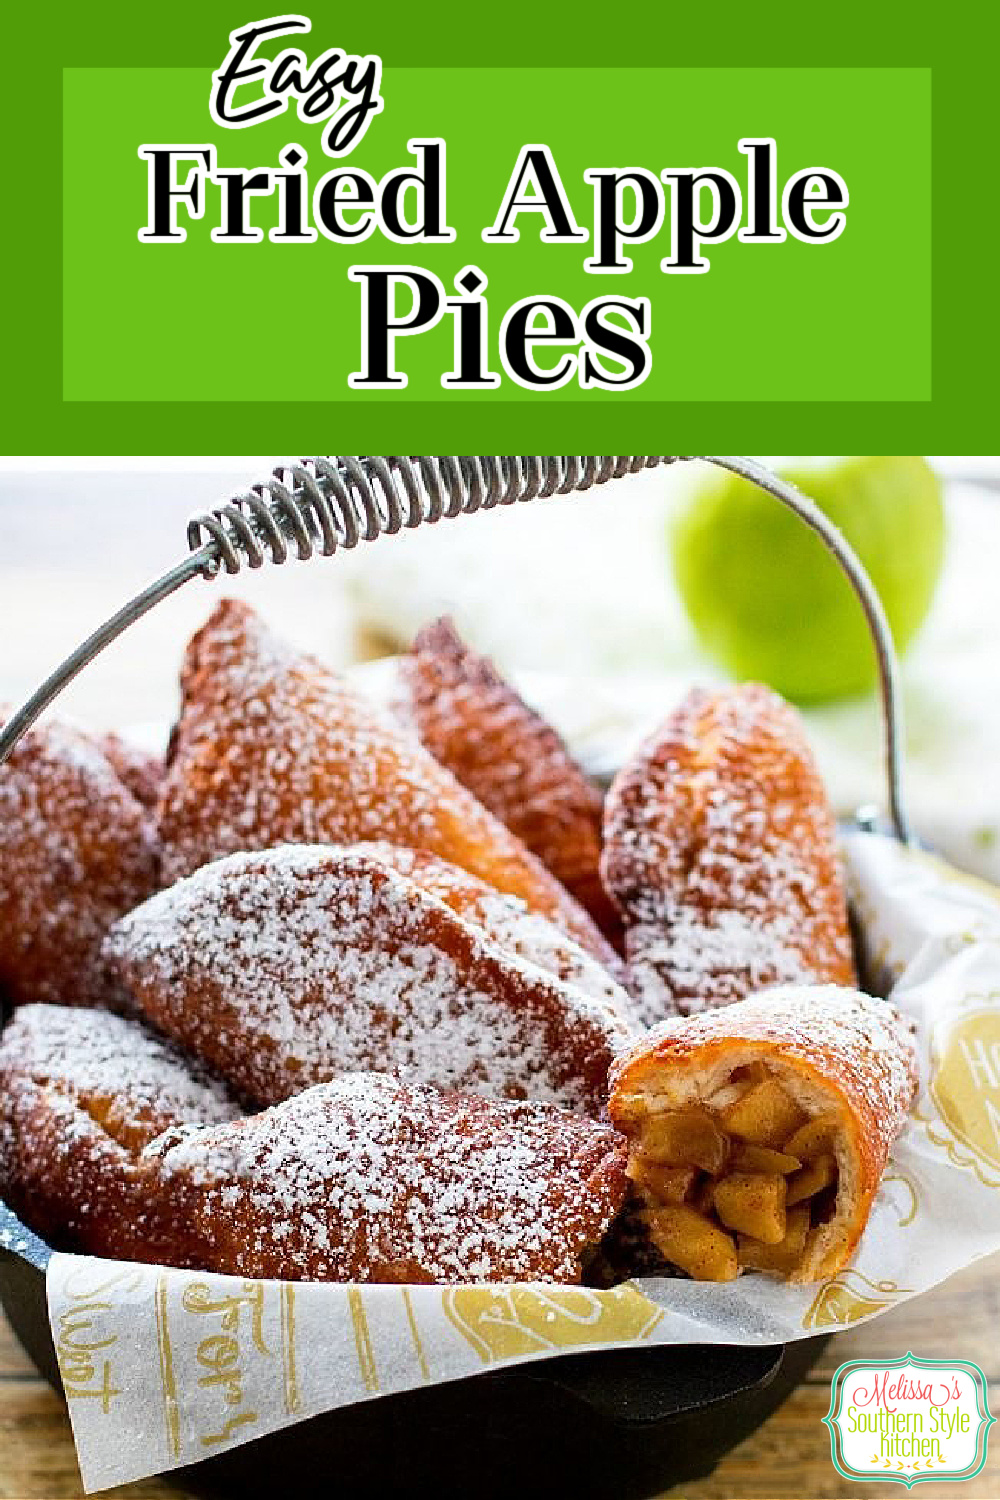 Enjoy these Easy Fried Apple Pies with a dusting of powdered sugar for breakfast, brunch or dessert #friedapplepies #applepie #friedpies #apples #appledesserts #breakfast #brunch #southernfood #southernrecipes #desserts #dessertfoodrecipes